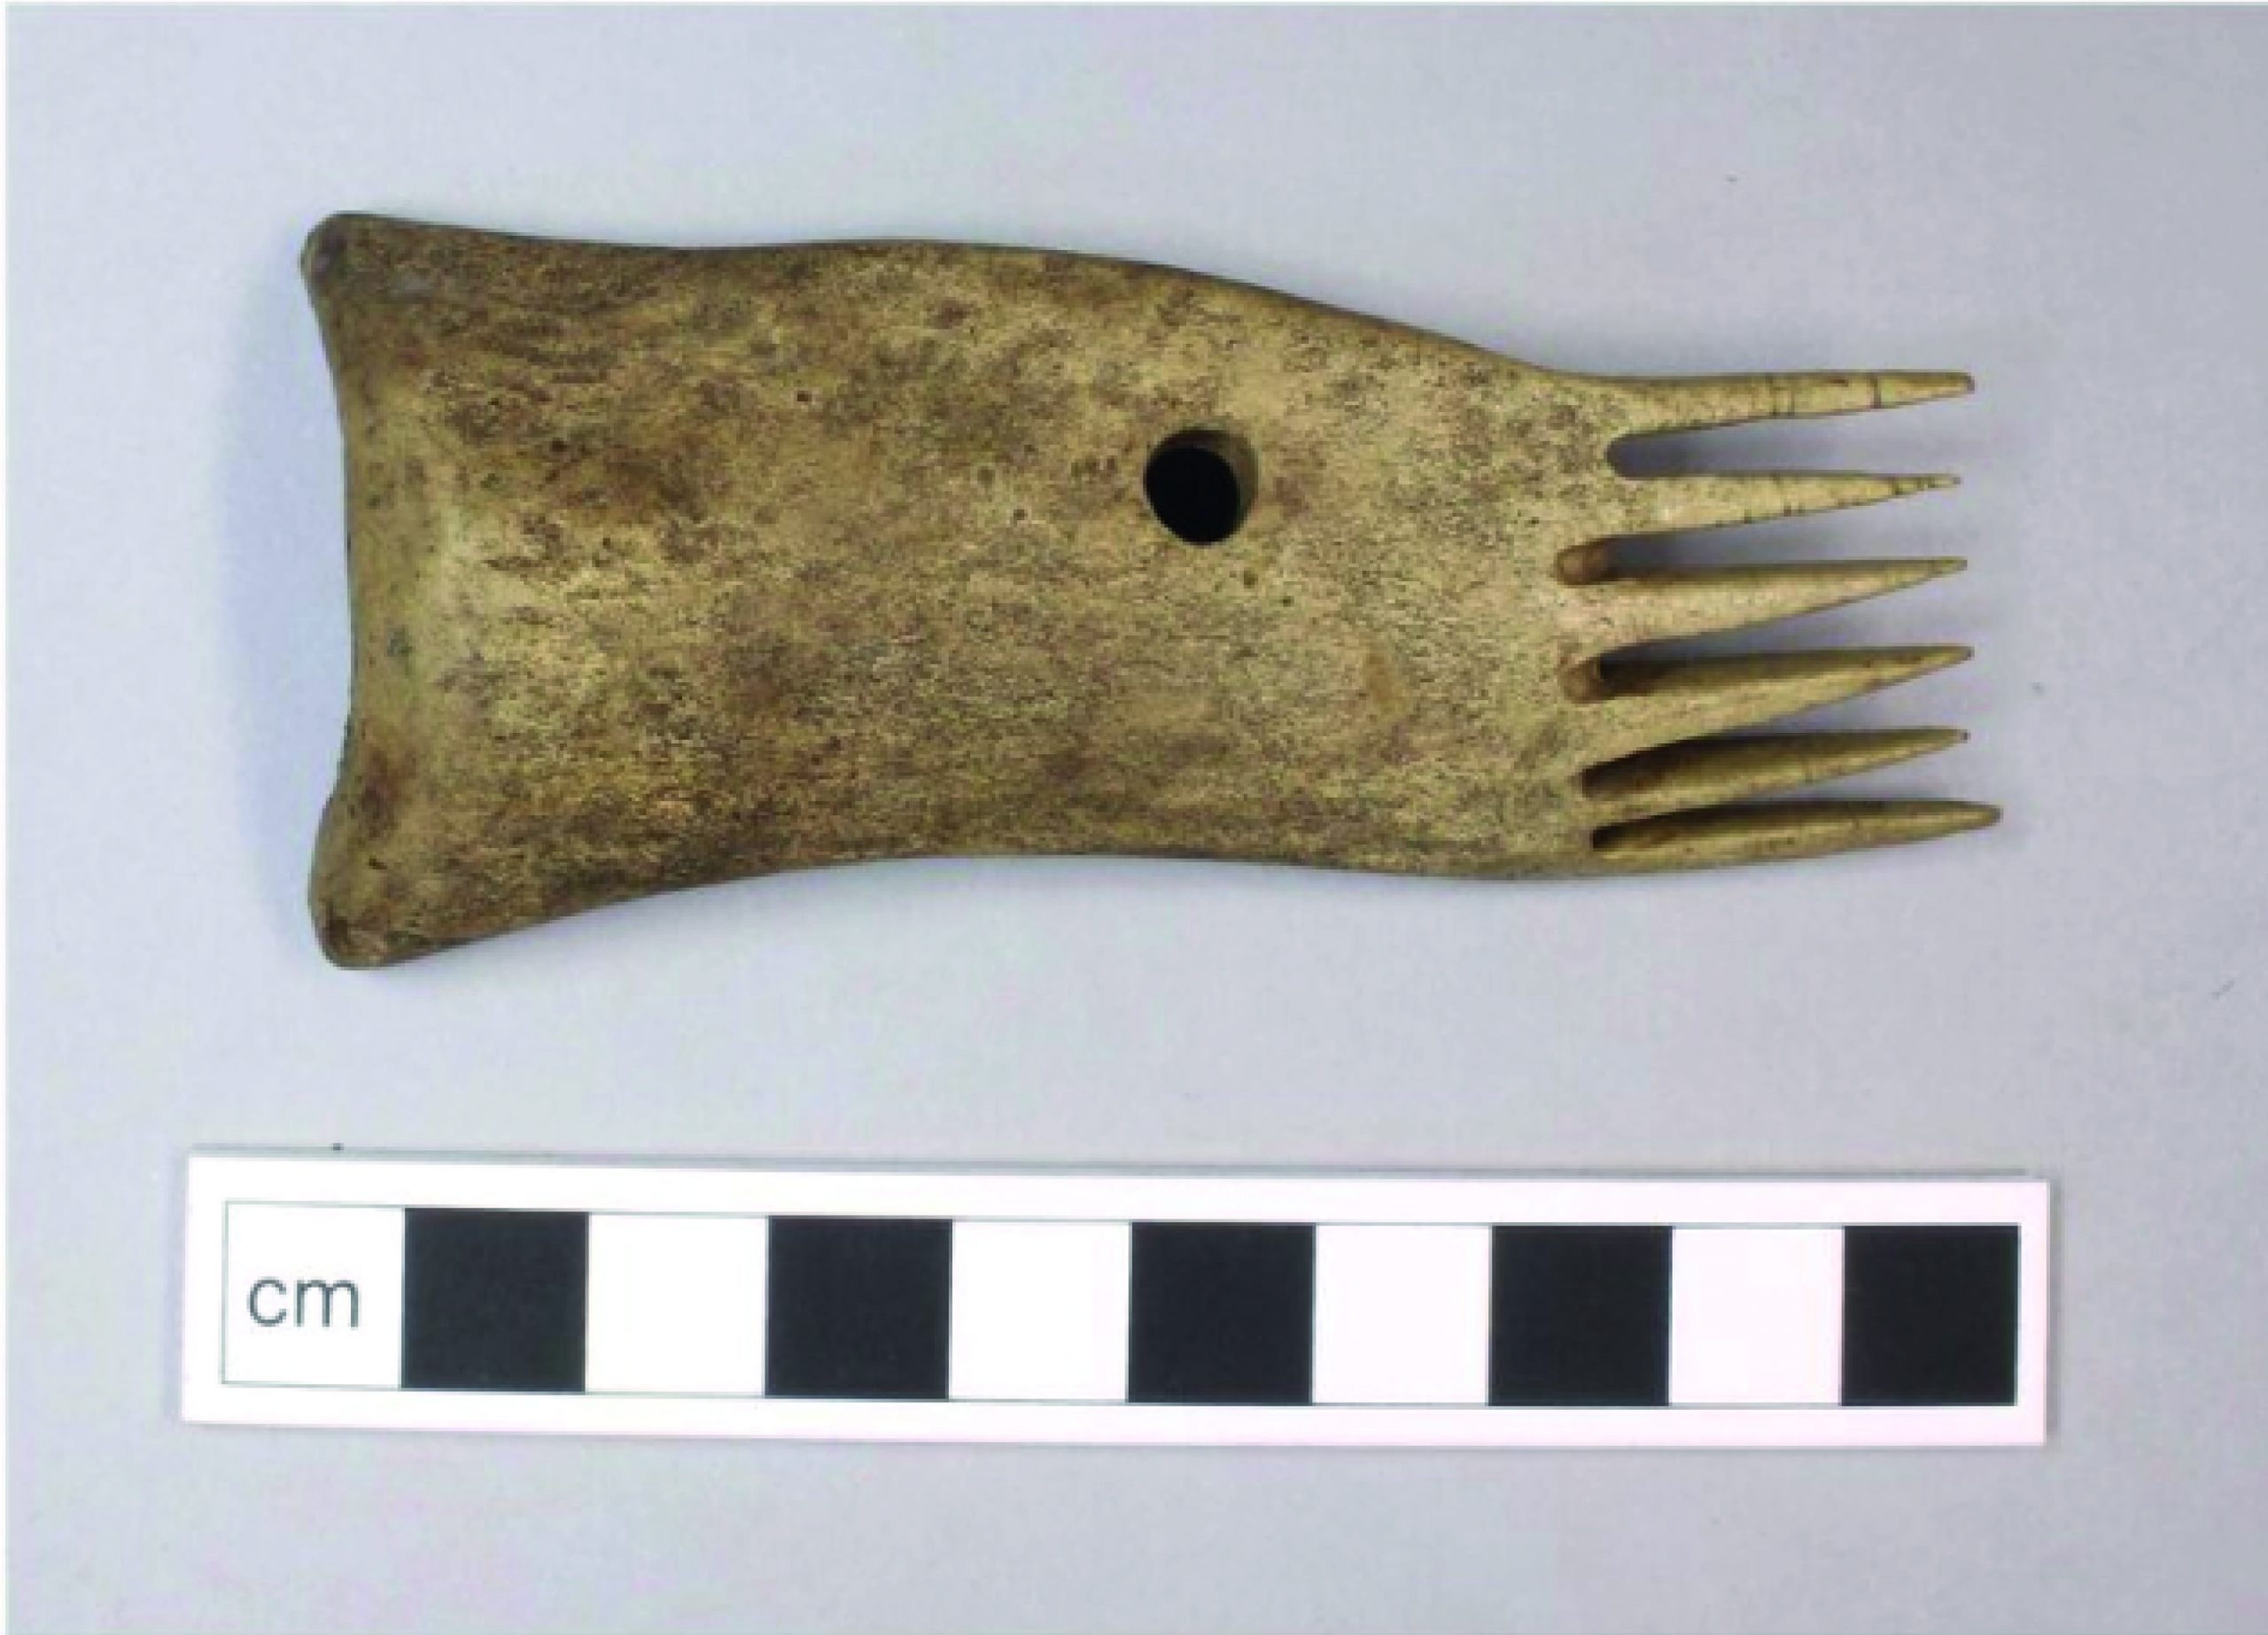 A narrow comb with six long teeth, widely spaced. Made of antler with a perforation, perhaps for a leather thong or string/twine.